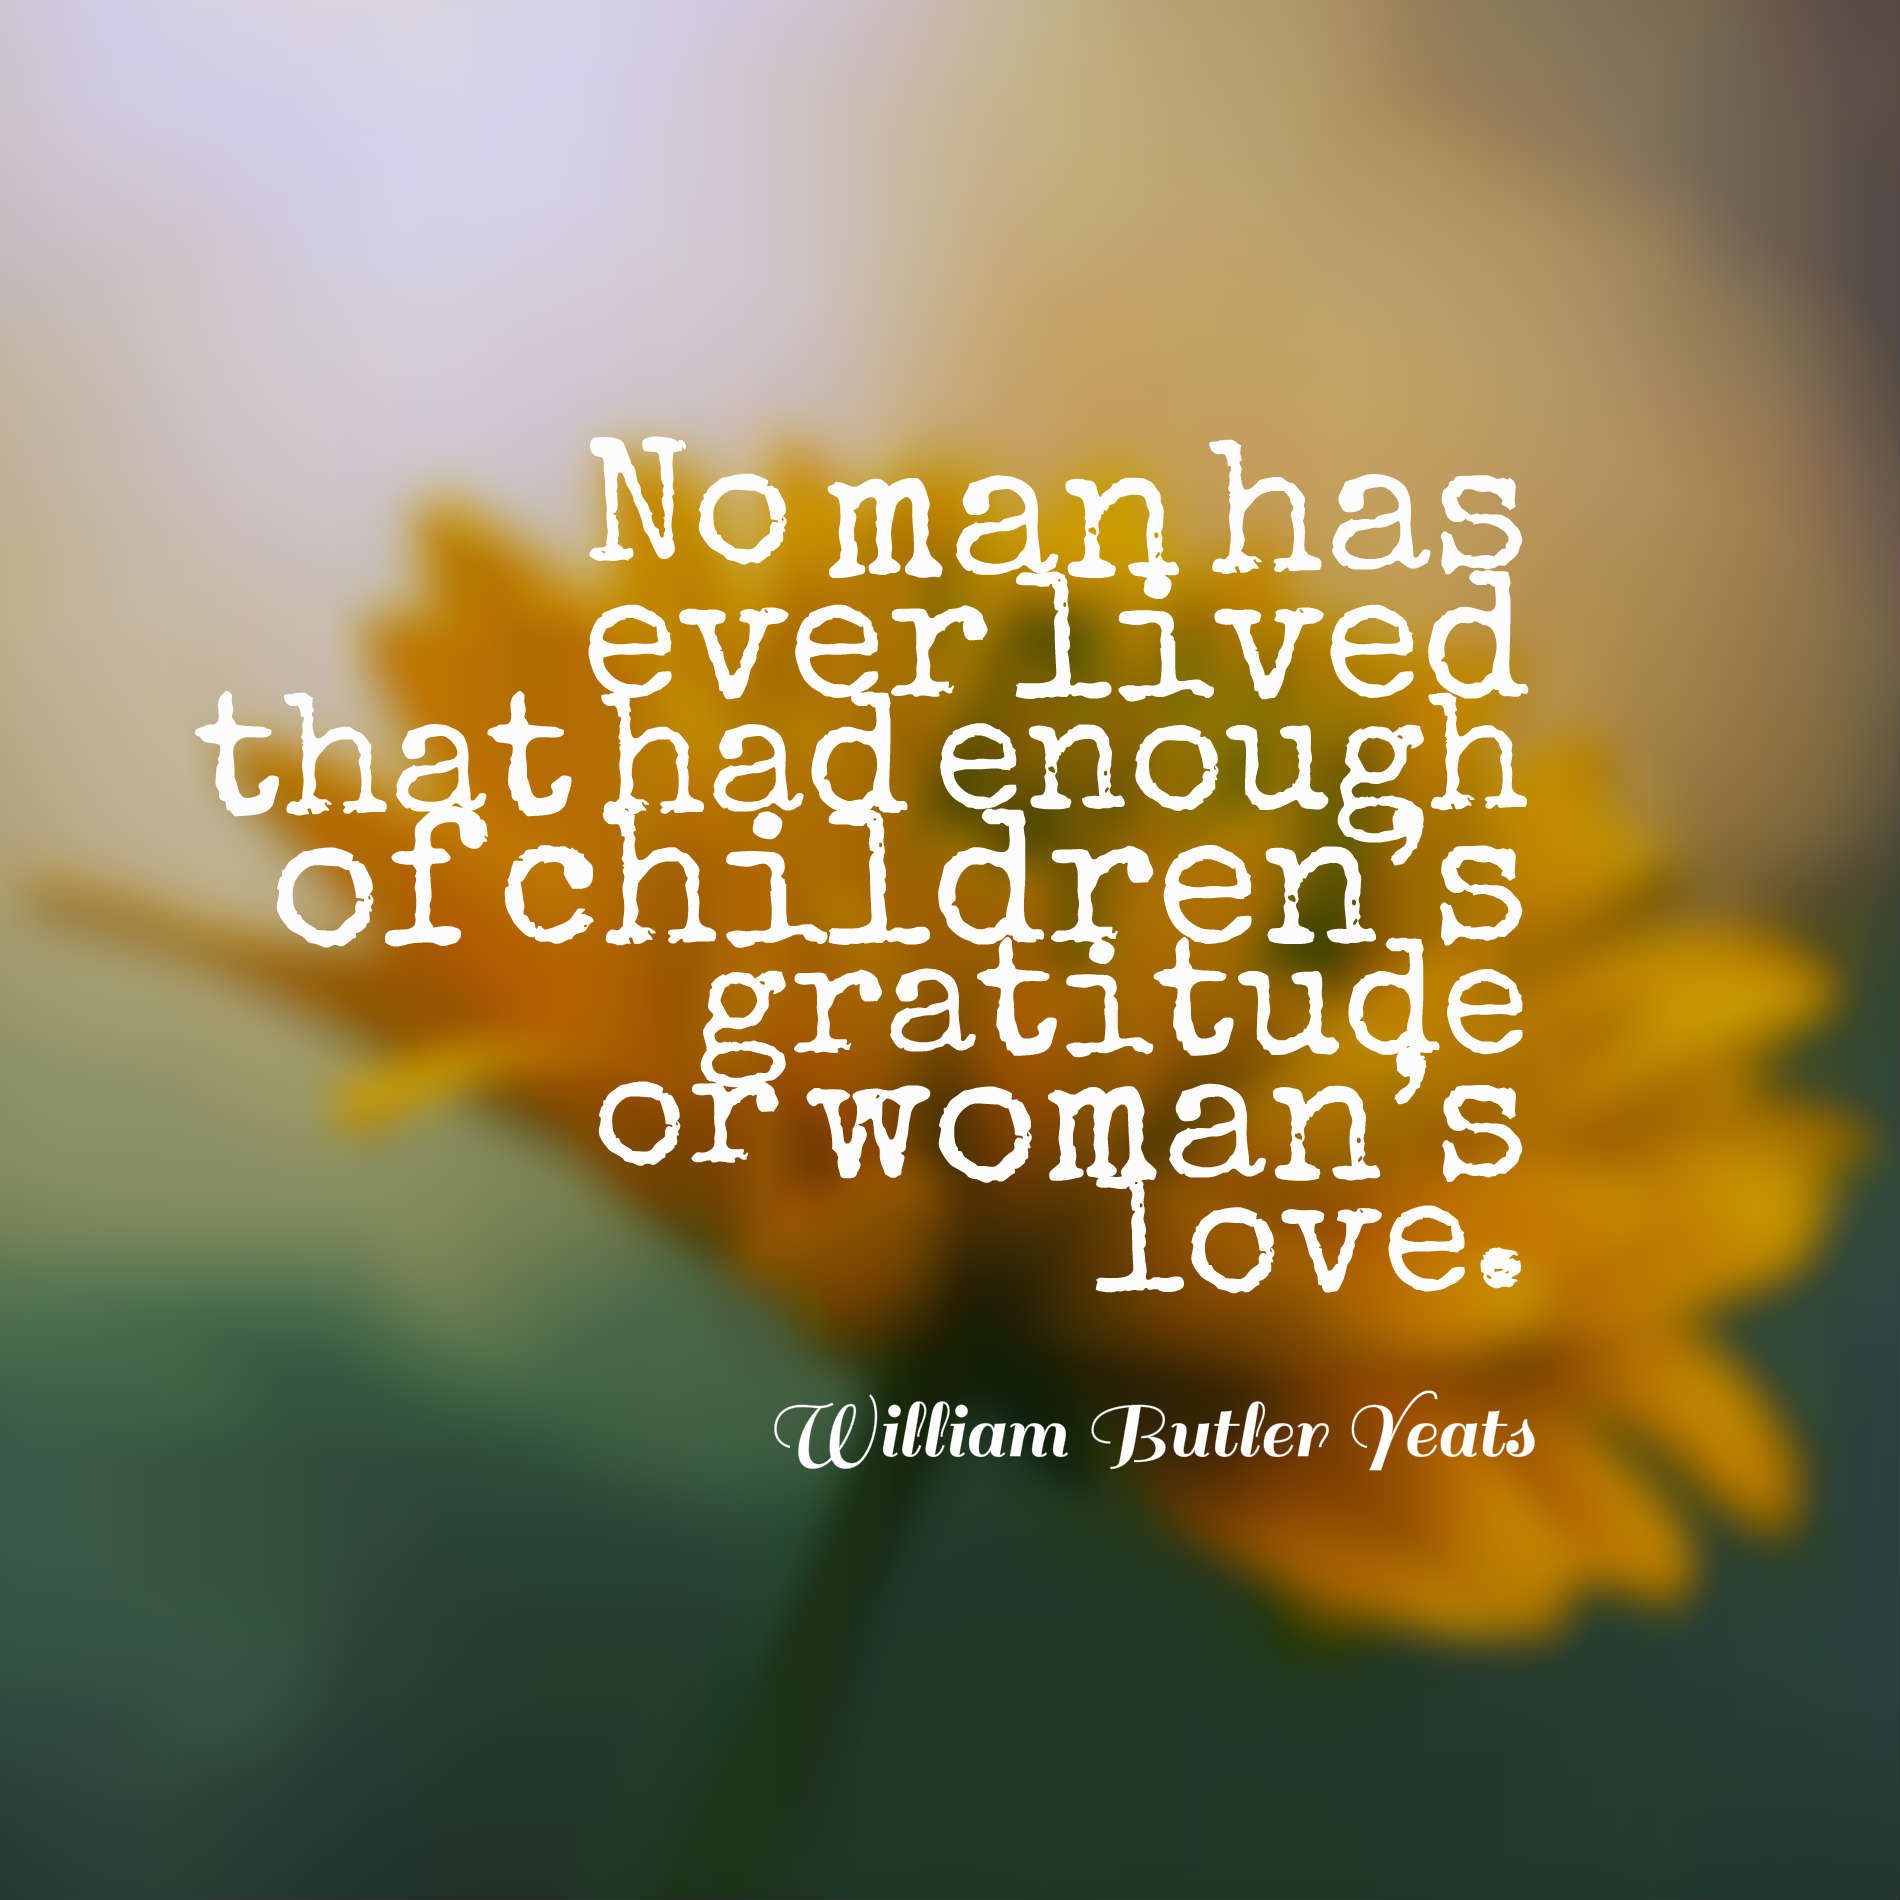 No man has ever lived that had enough of children’s gratitude or woman’s love.